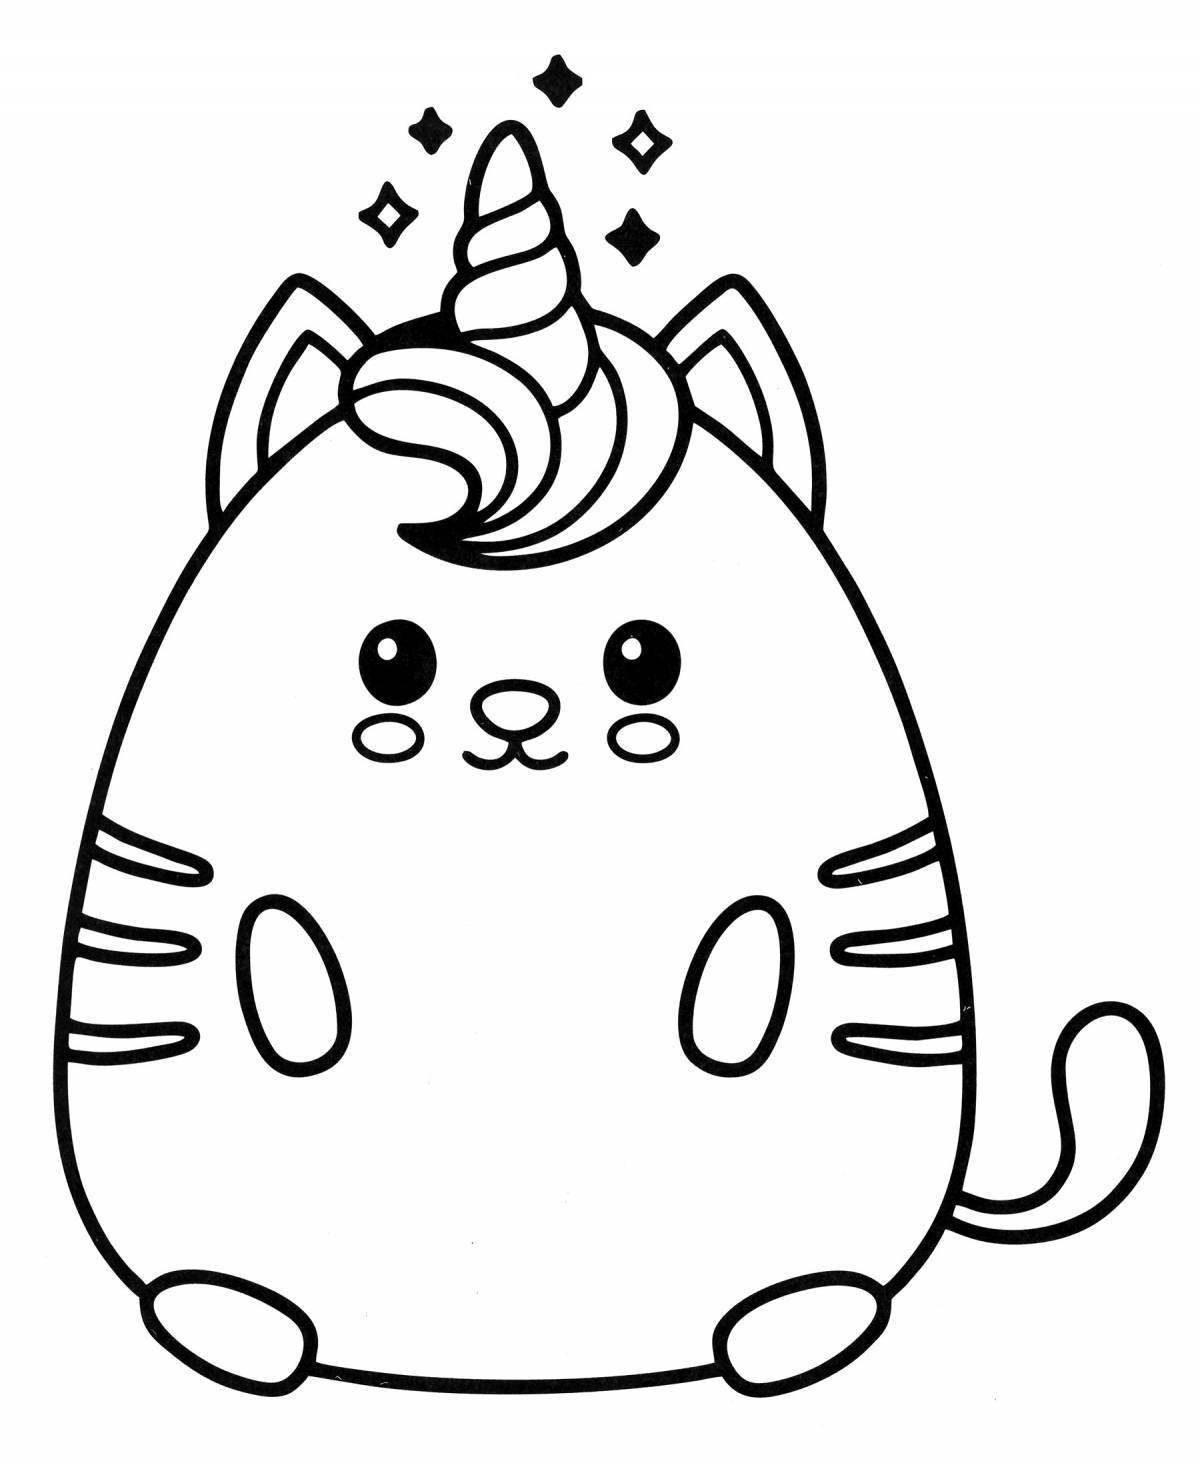 Radiant coloring page unicorn pussy